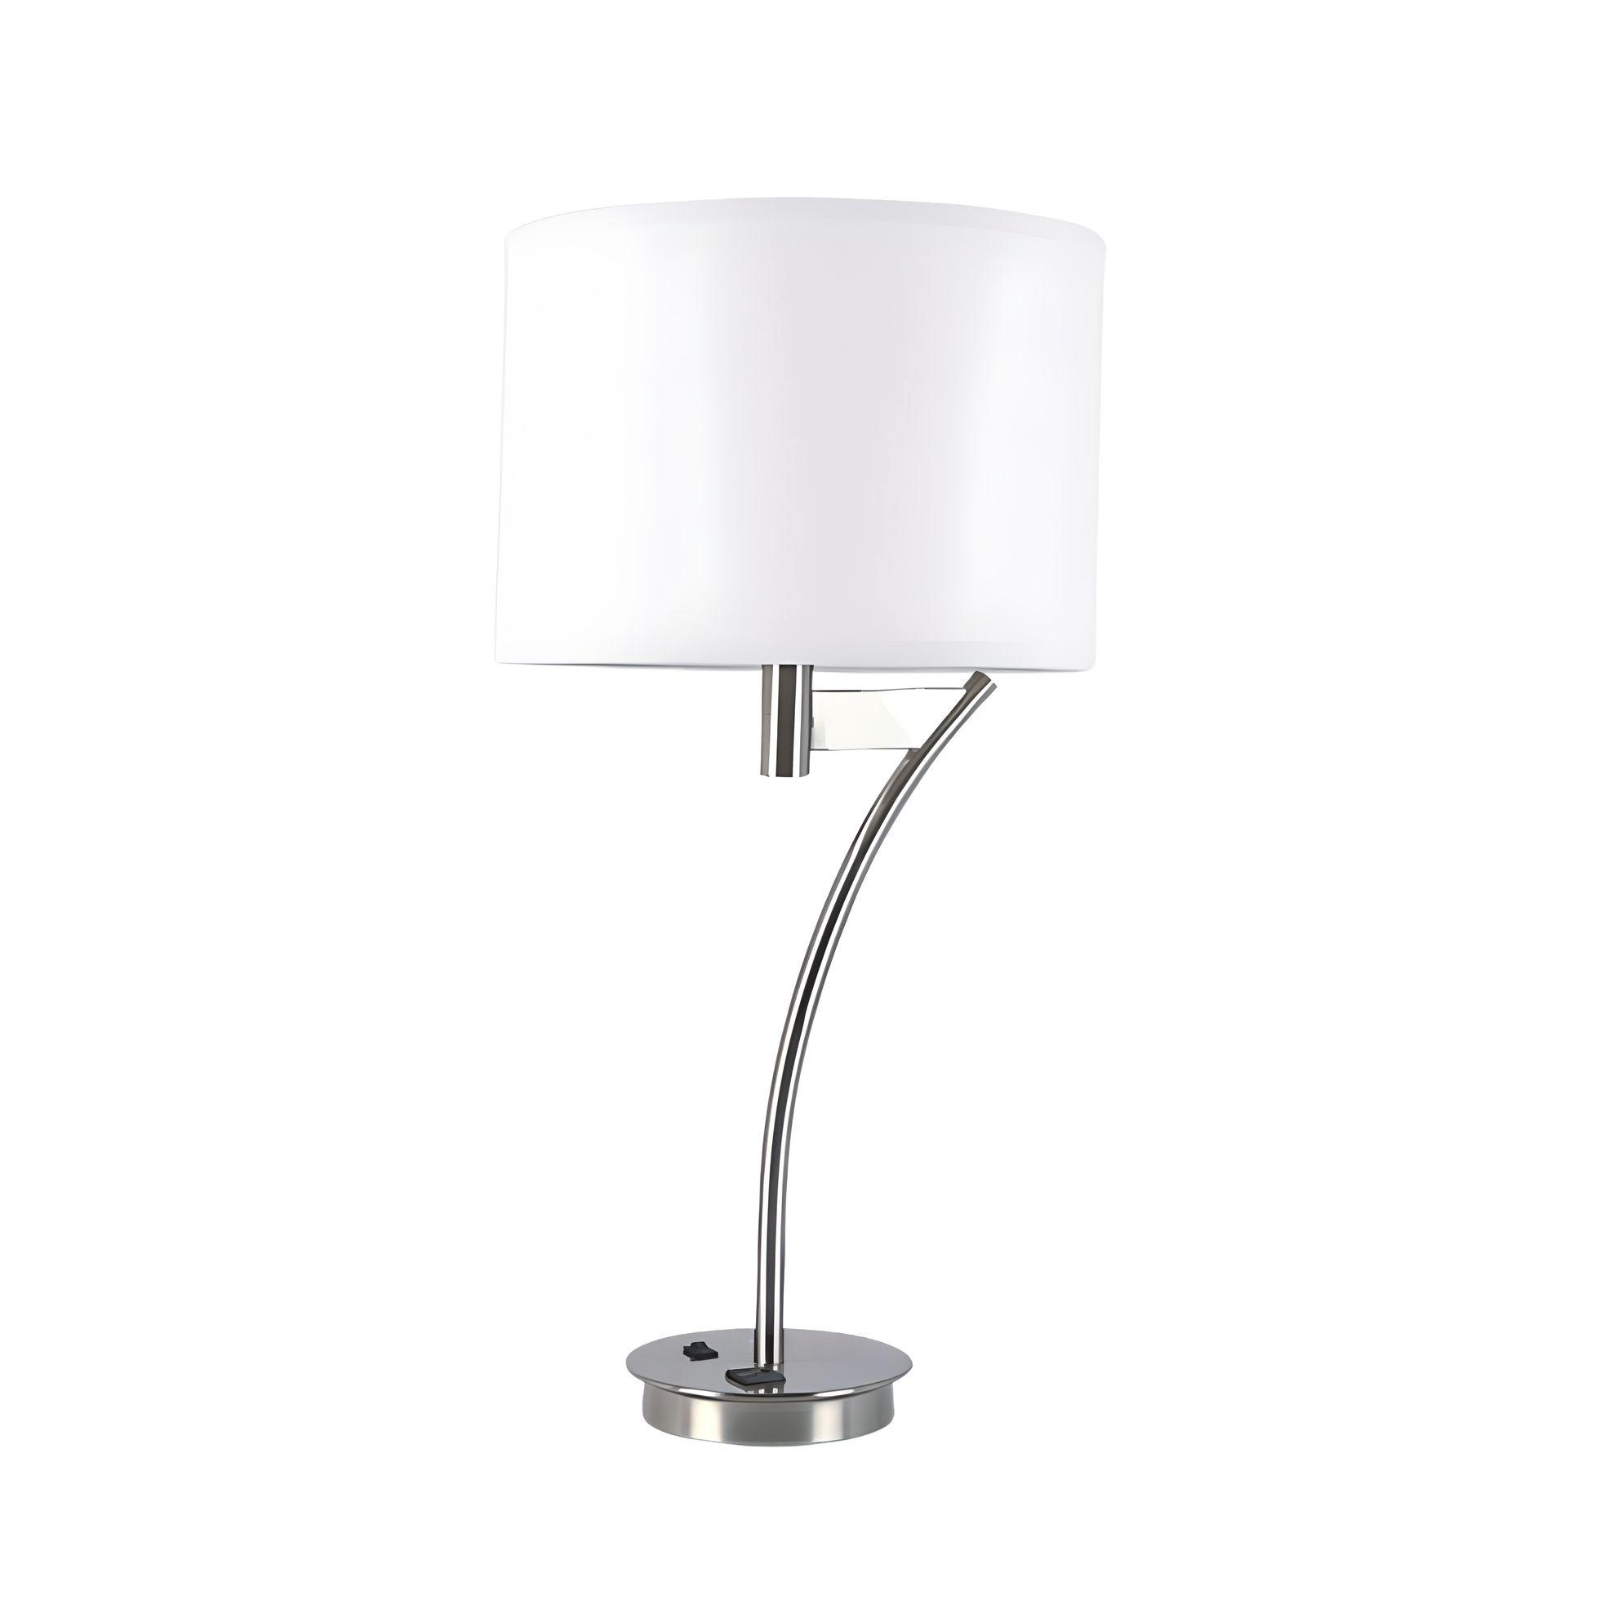 Astra Desk Table Lamps - Desk Table Lamps with brushed nickel finish and one convenience outlet - Eco LED Lightings 